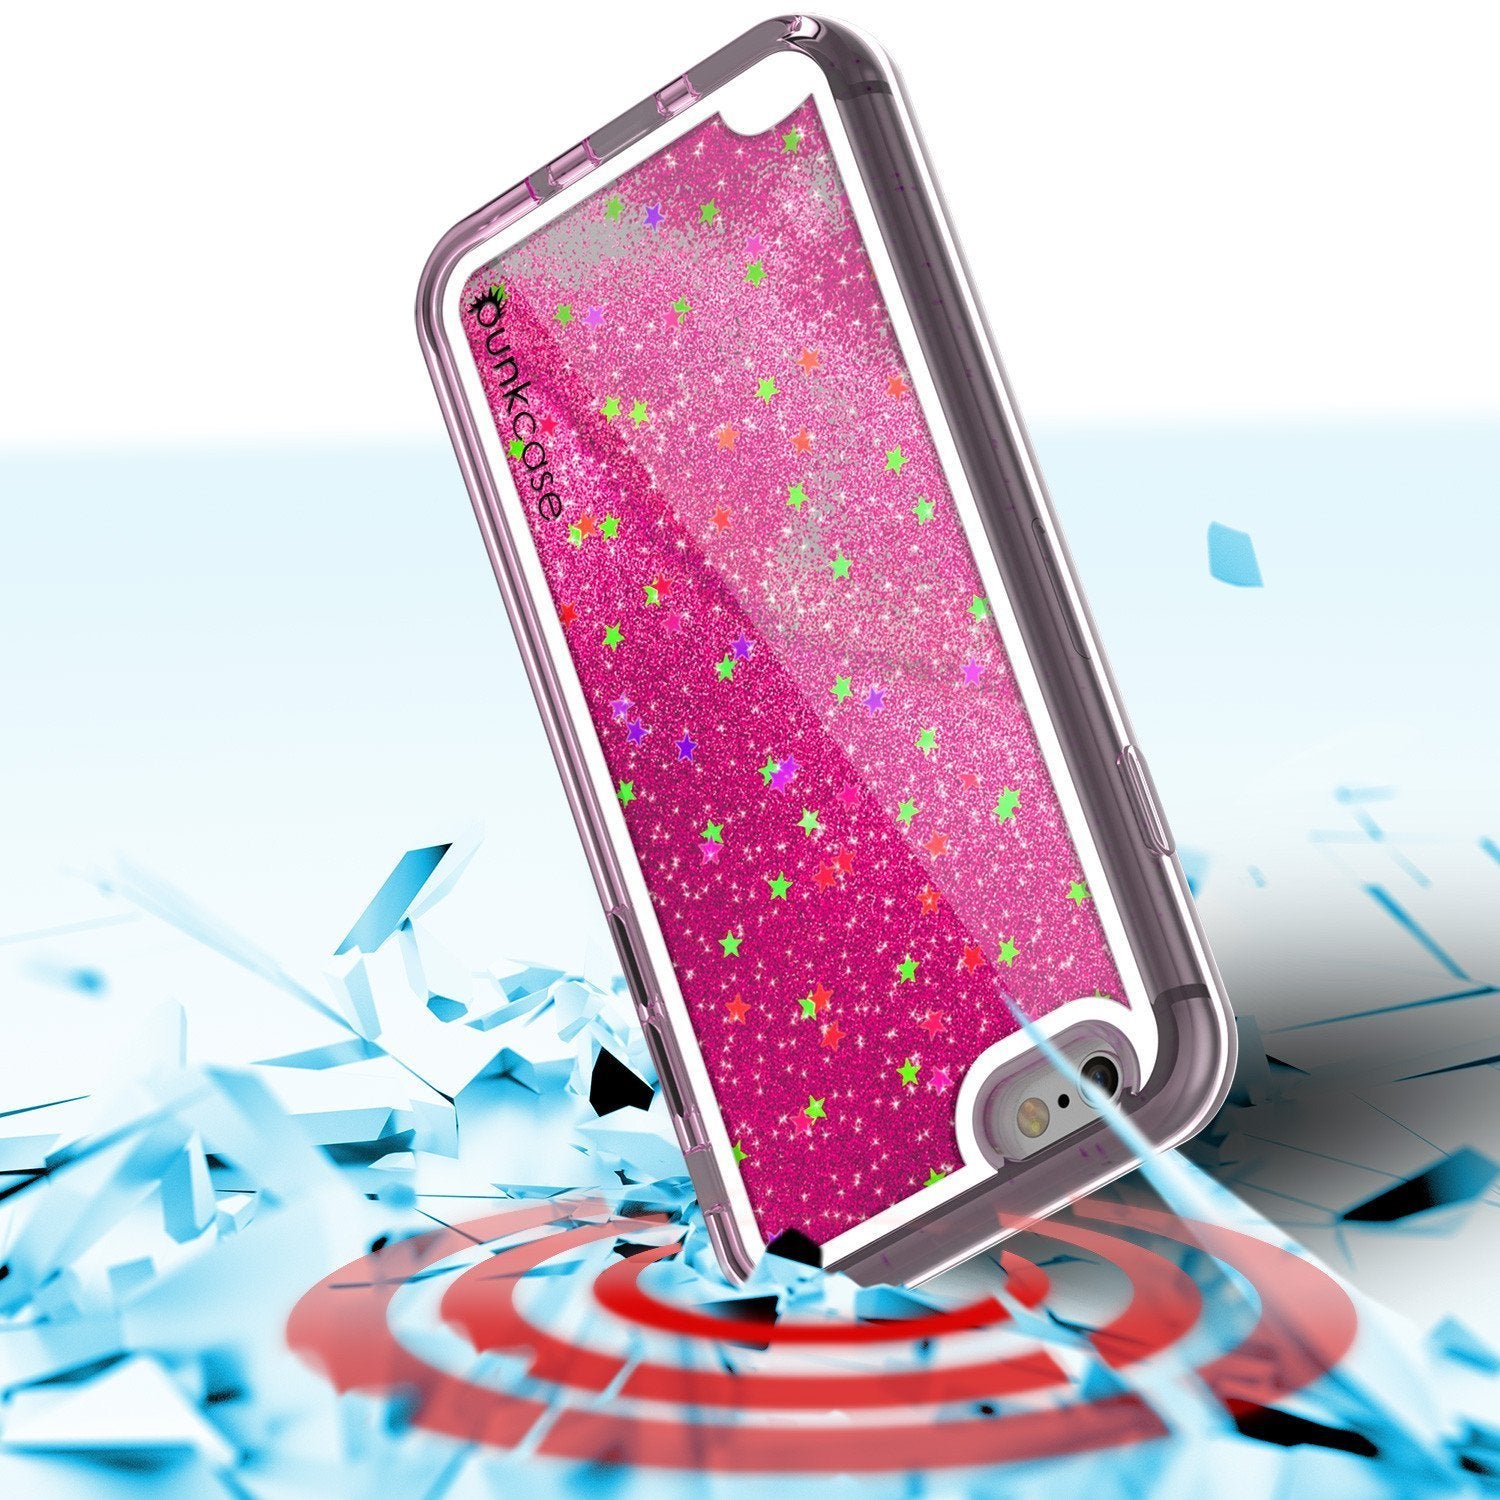 iPhone SE (4.7") Case, PunkCase LIQUID Pink Series, Protective Dual Layer Floating Glitter Cover